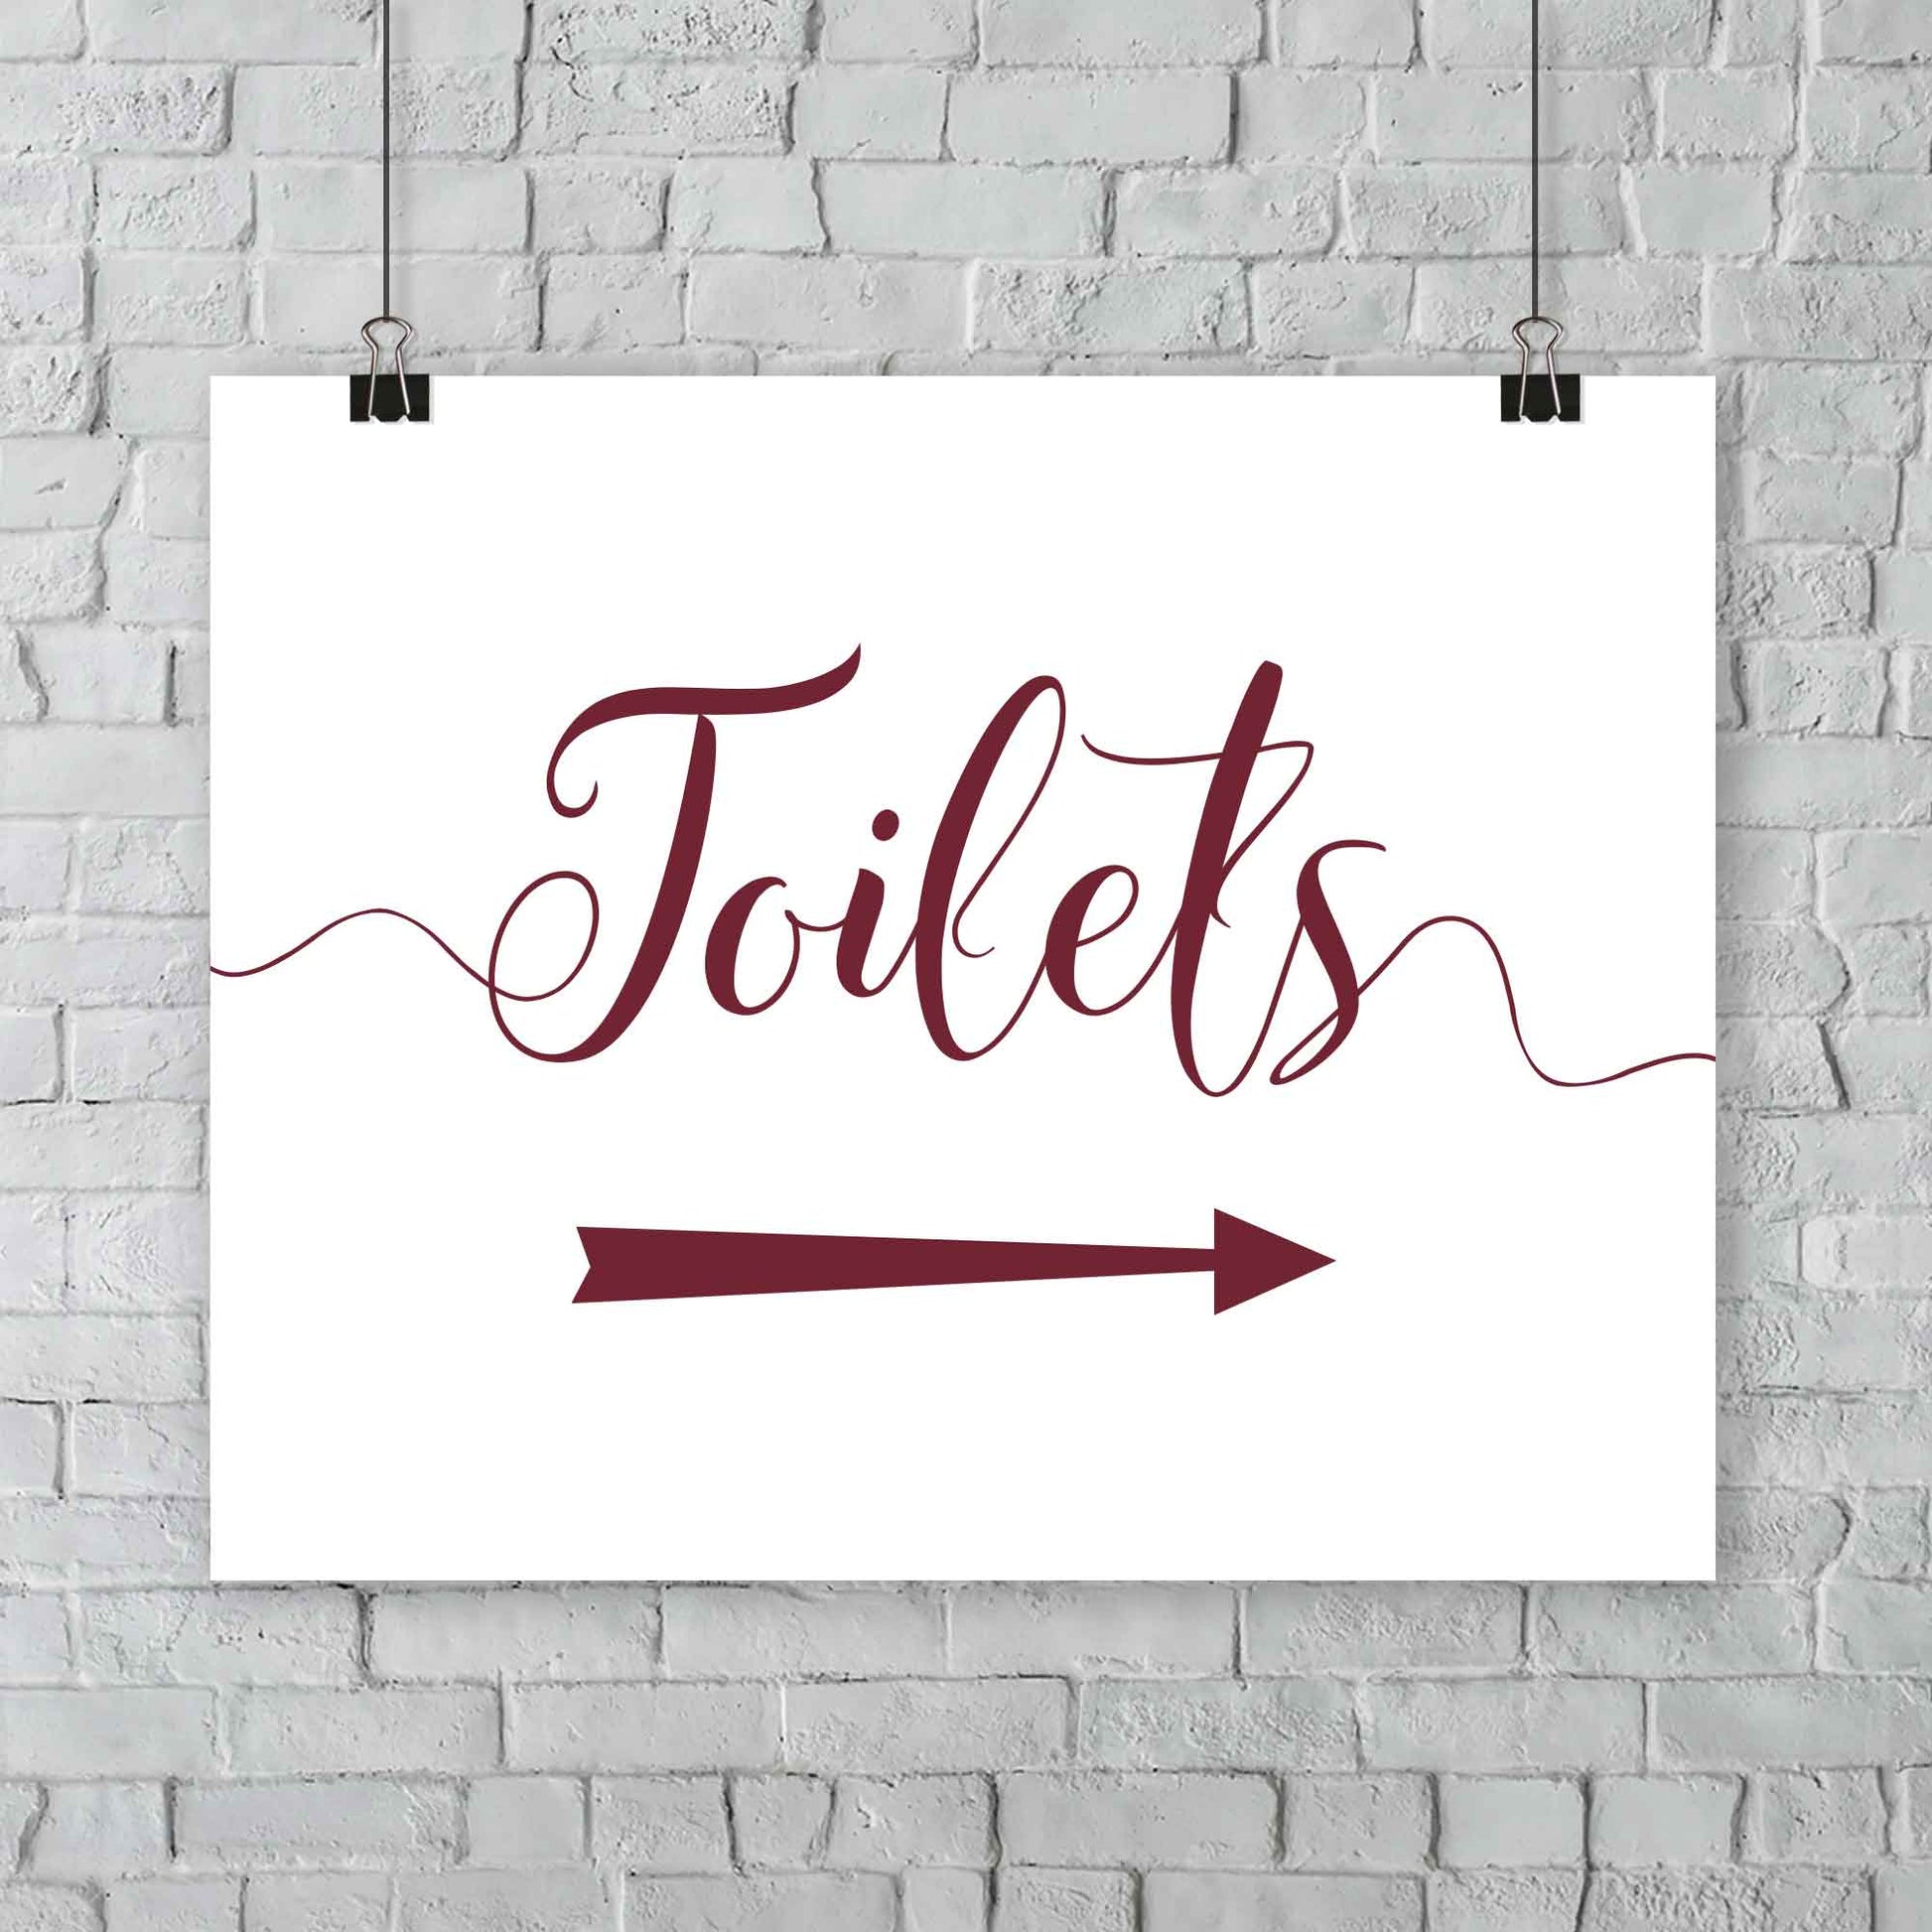 printed deep red wedding toilets arrow signage on a wall